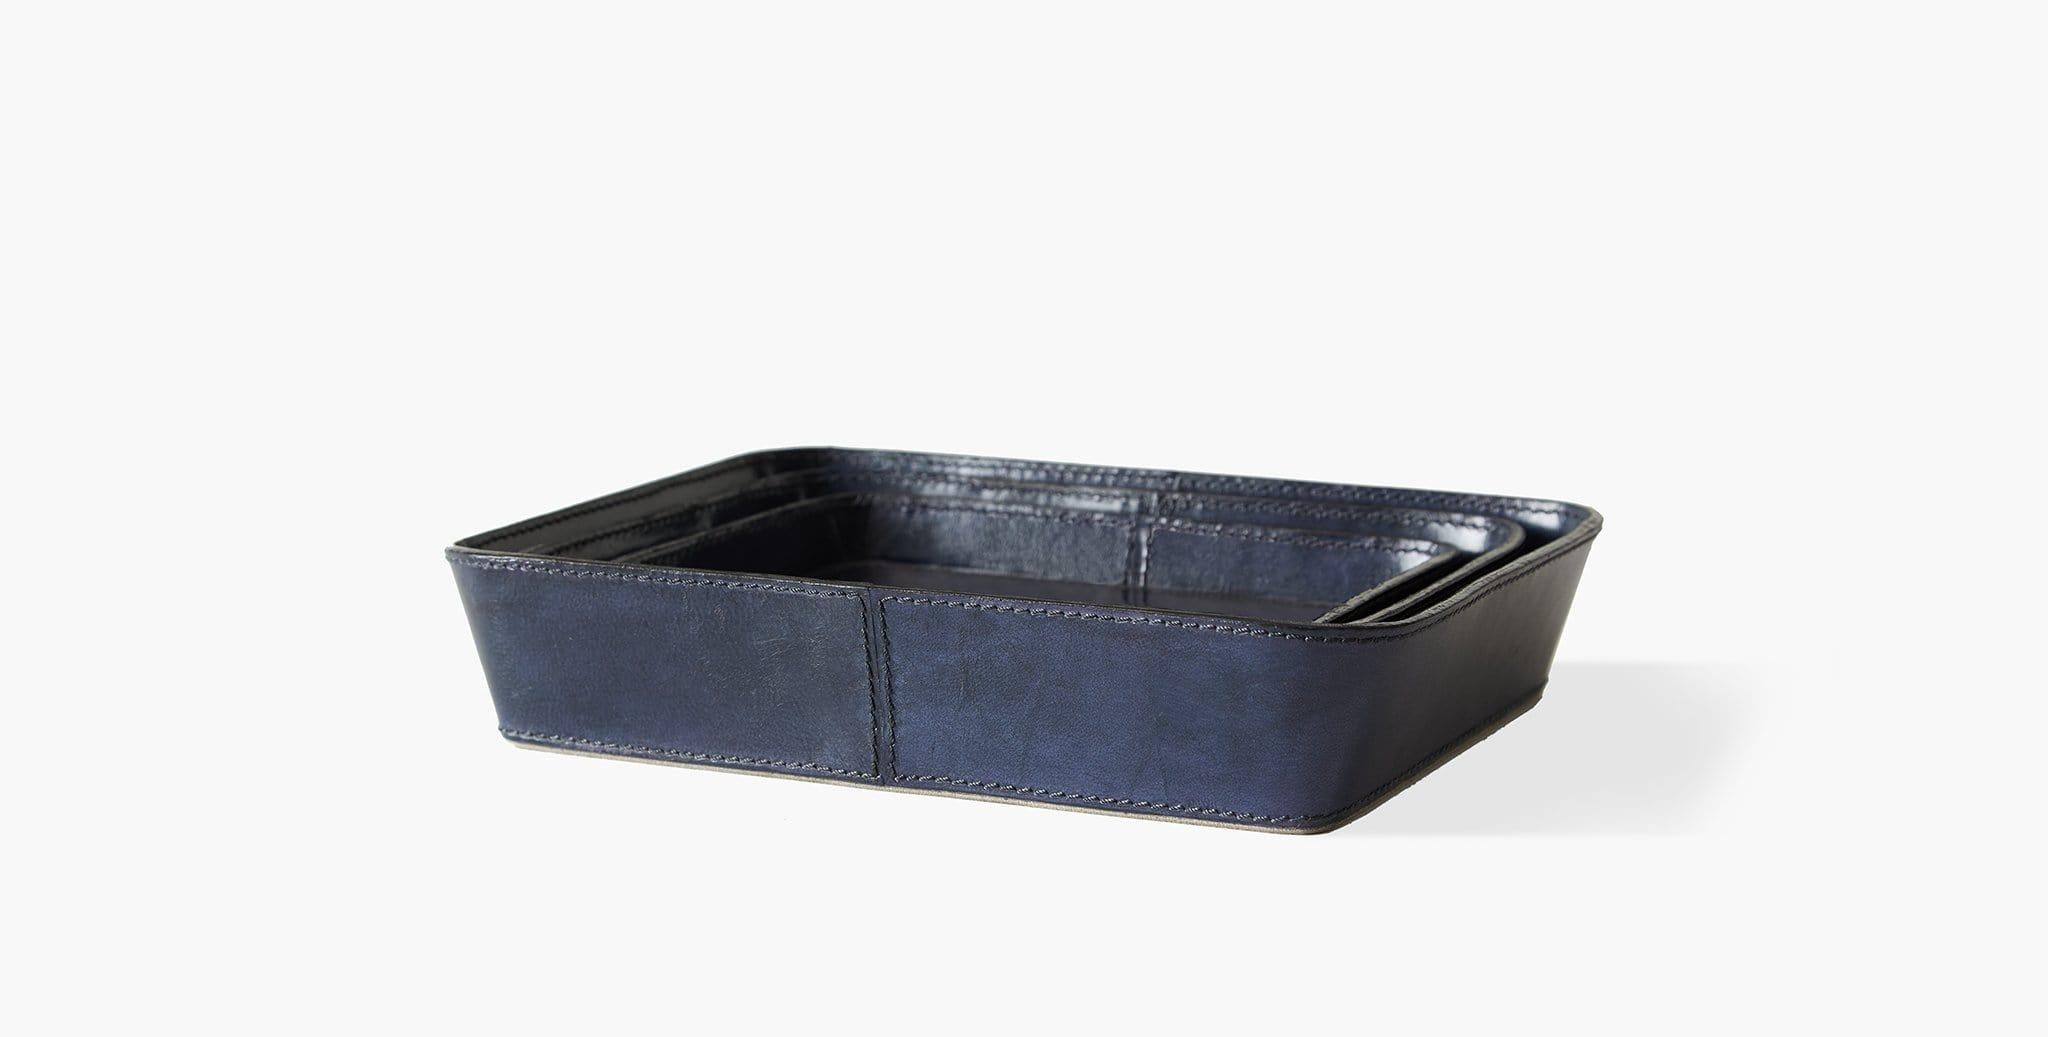 Our Bromes Leather Valet Trays feature a suede base for stability and provide a functional accent in your home office. Our handcrafted fabrics, leathers, and finishes are inspired by the natural variations within fibers, textures, and weaves. Each